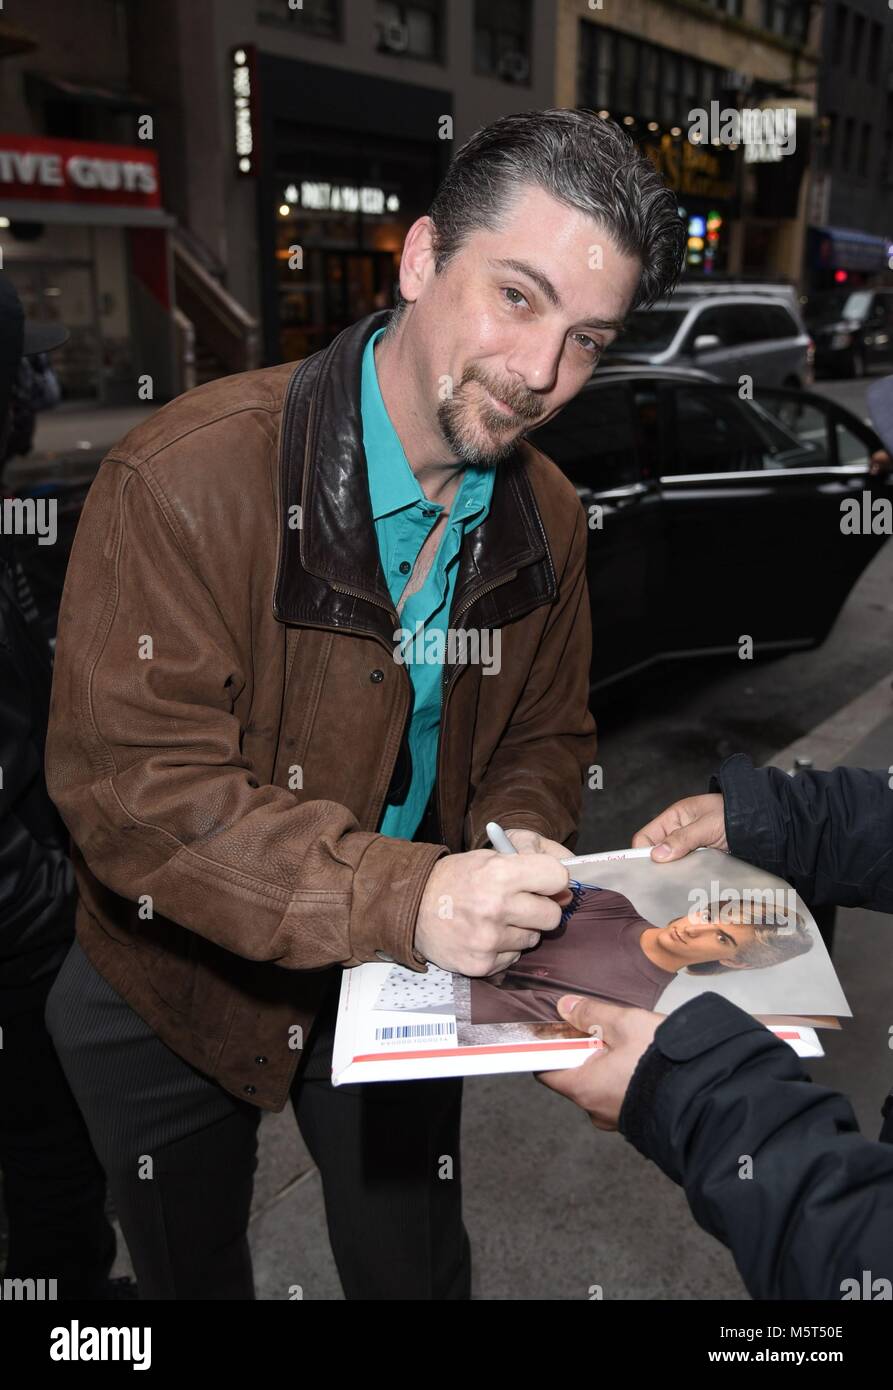 New York, NY, USA. 26th Feb, 2018. Jeremy Miller, seen at the Today Show for a Growing Pains Reunion out and about for Celebrity Candids - MON, New York, NY February 26, 2018. Credit: Derek Storm/Everett Collection/Alamy Live News Stock Photo